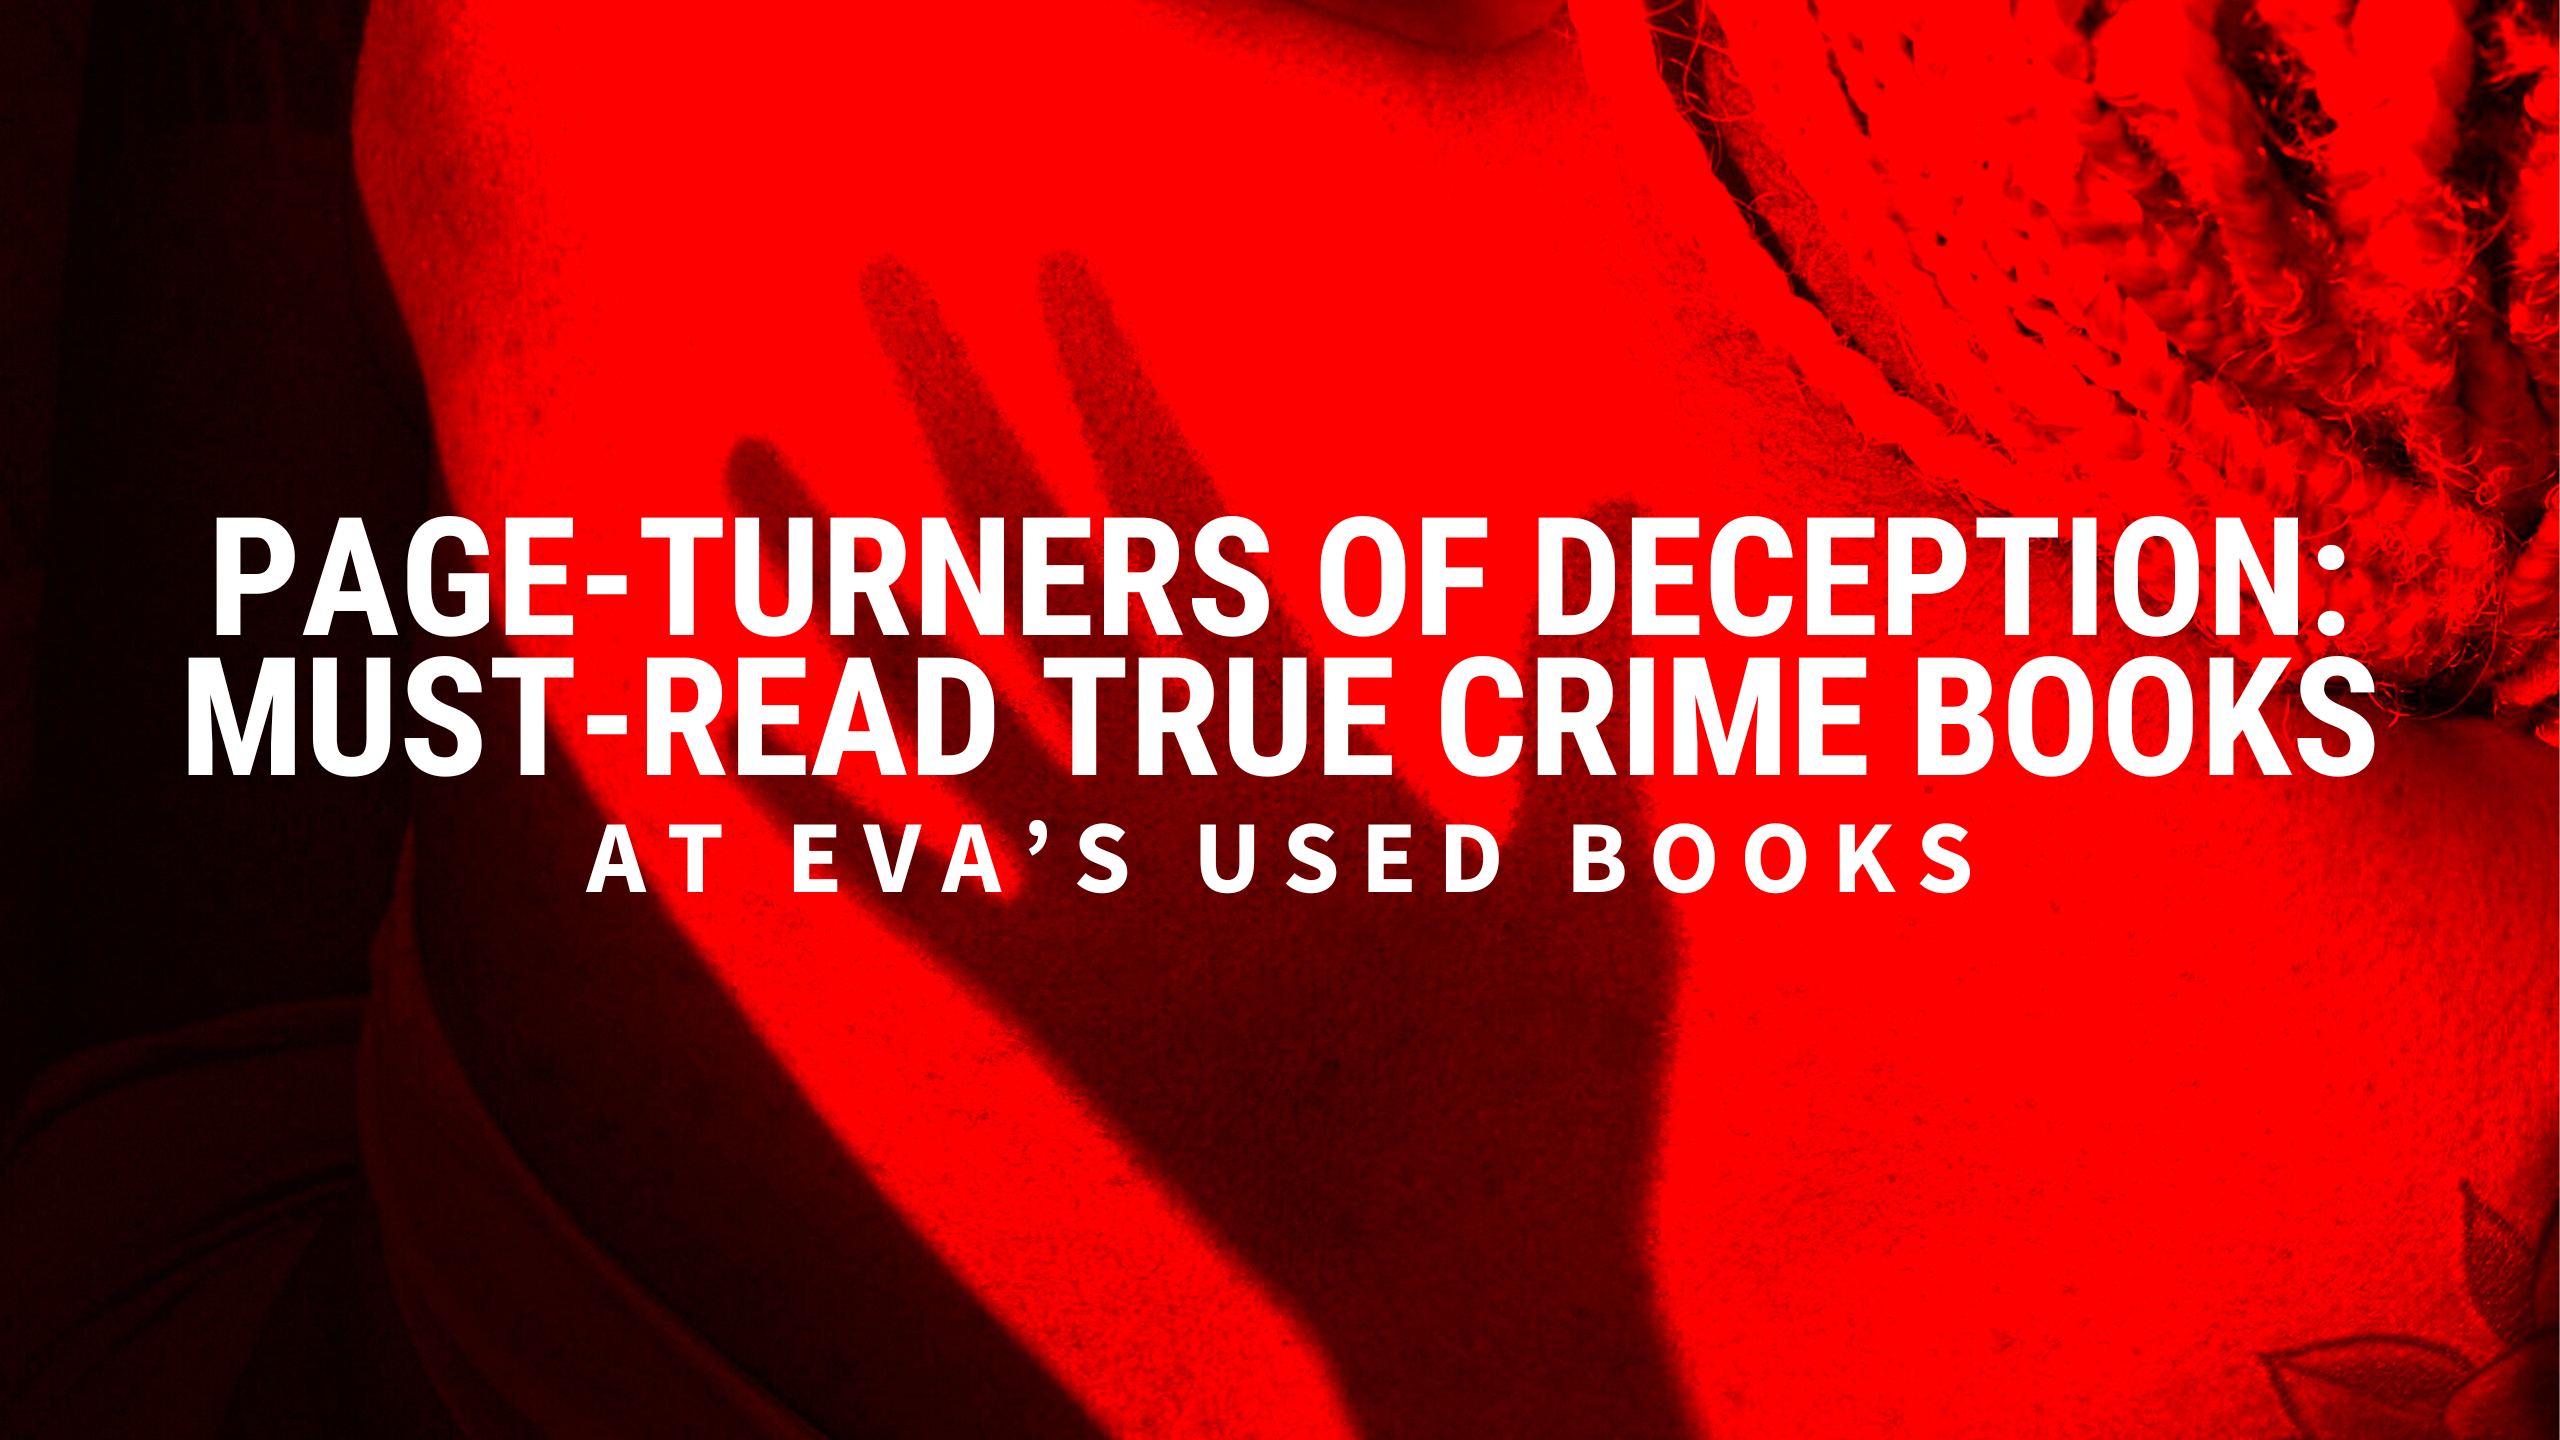 Page-Turners of Deception: Must-Read True Crime Books